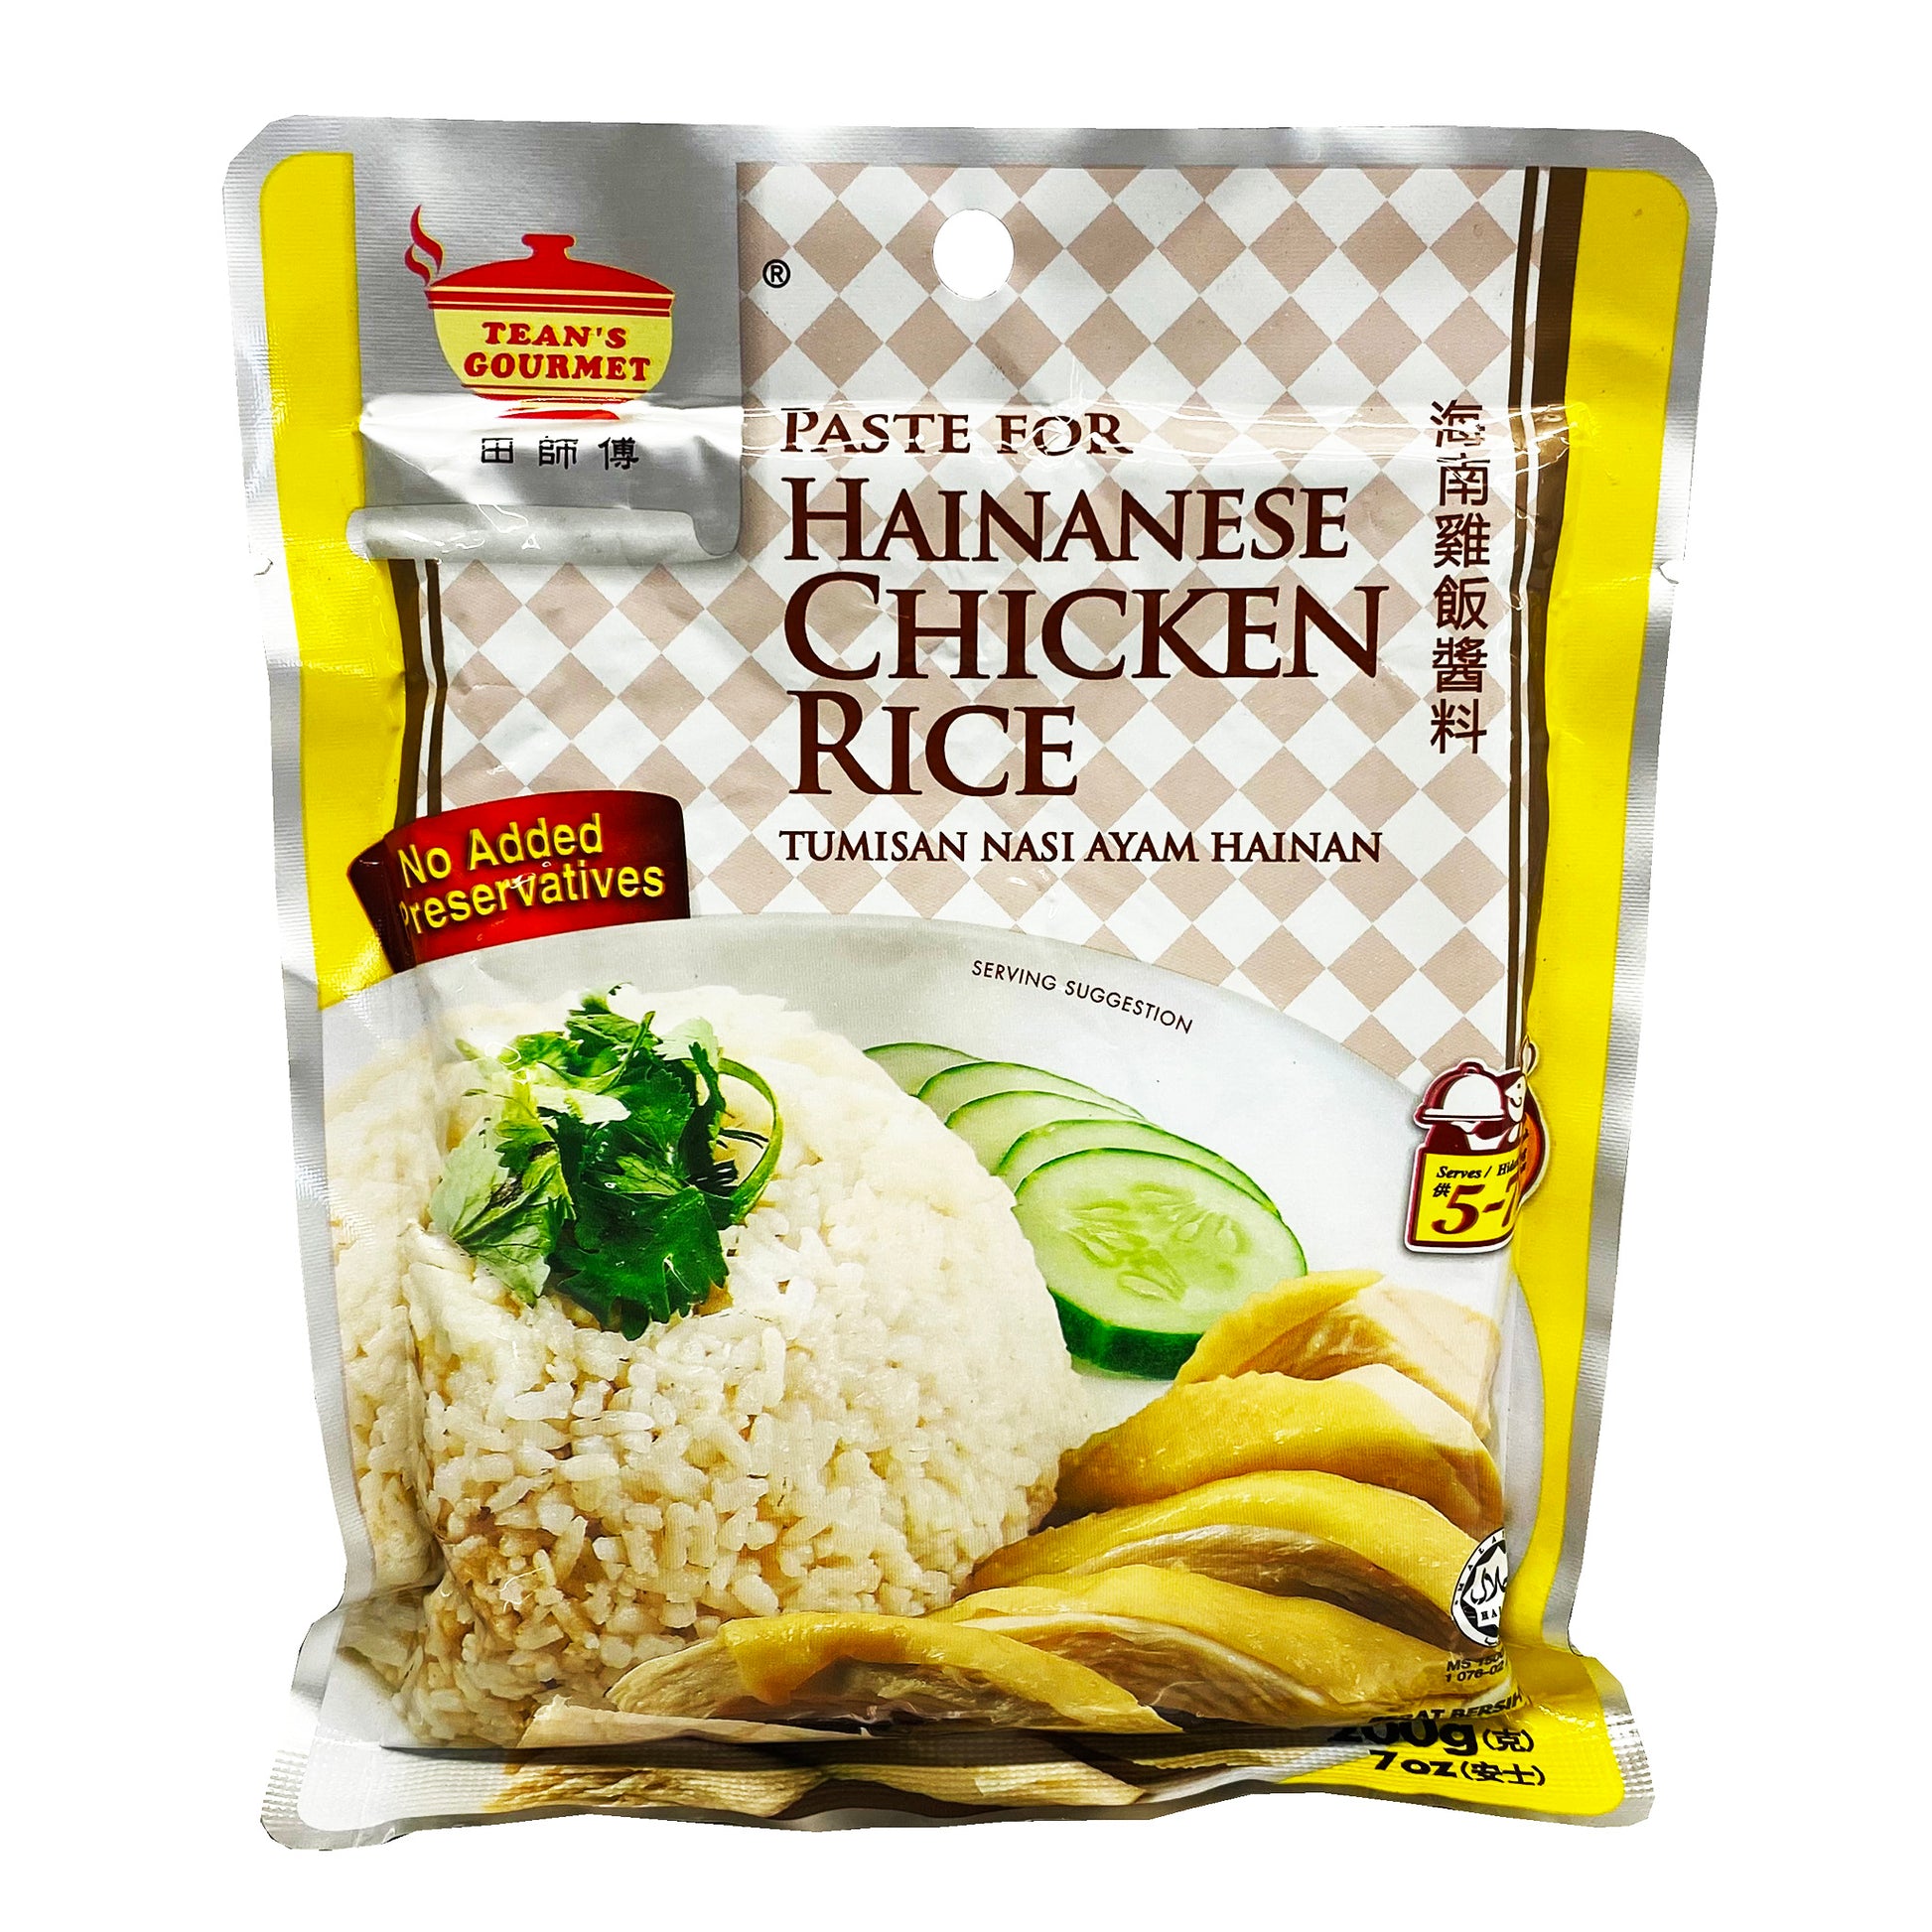 Front graphic image of Tean's Gourmet Paste - Hainanese Chicken Rice 7oz (200g)